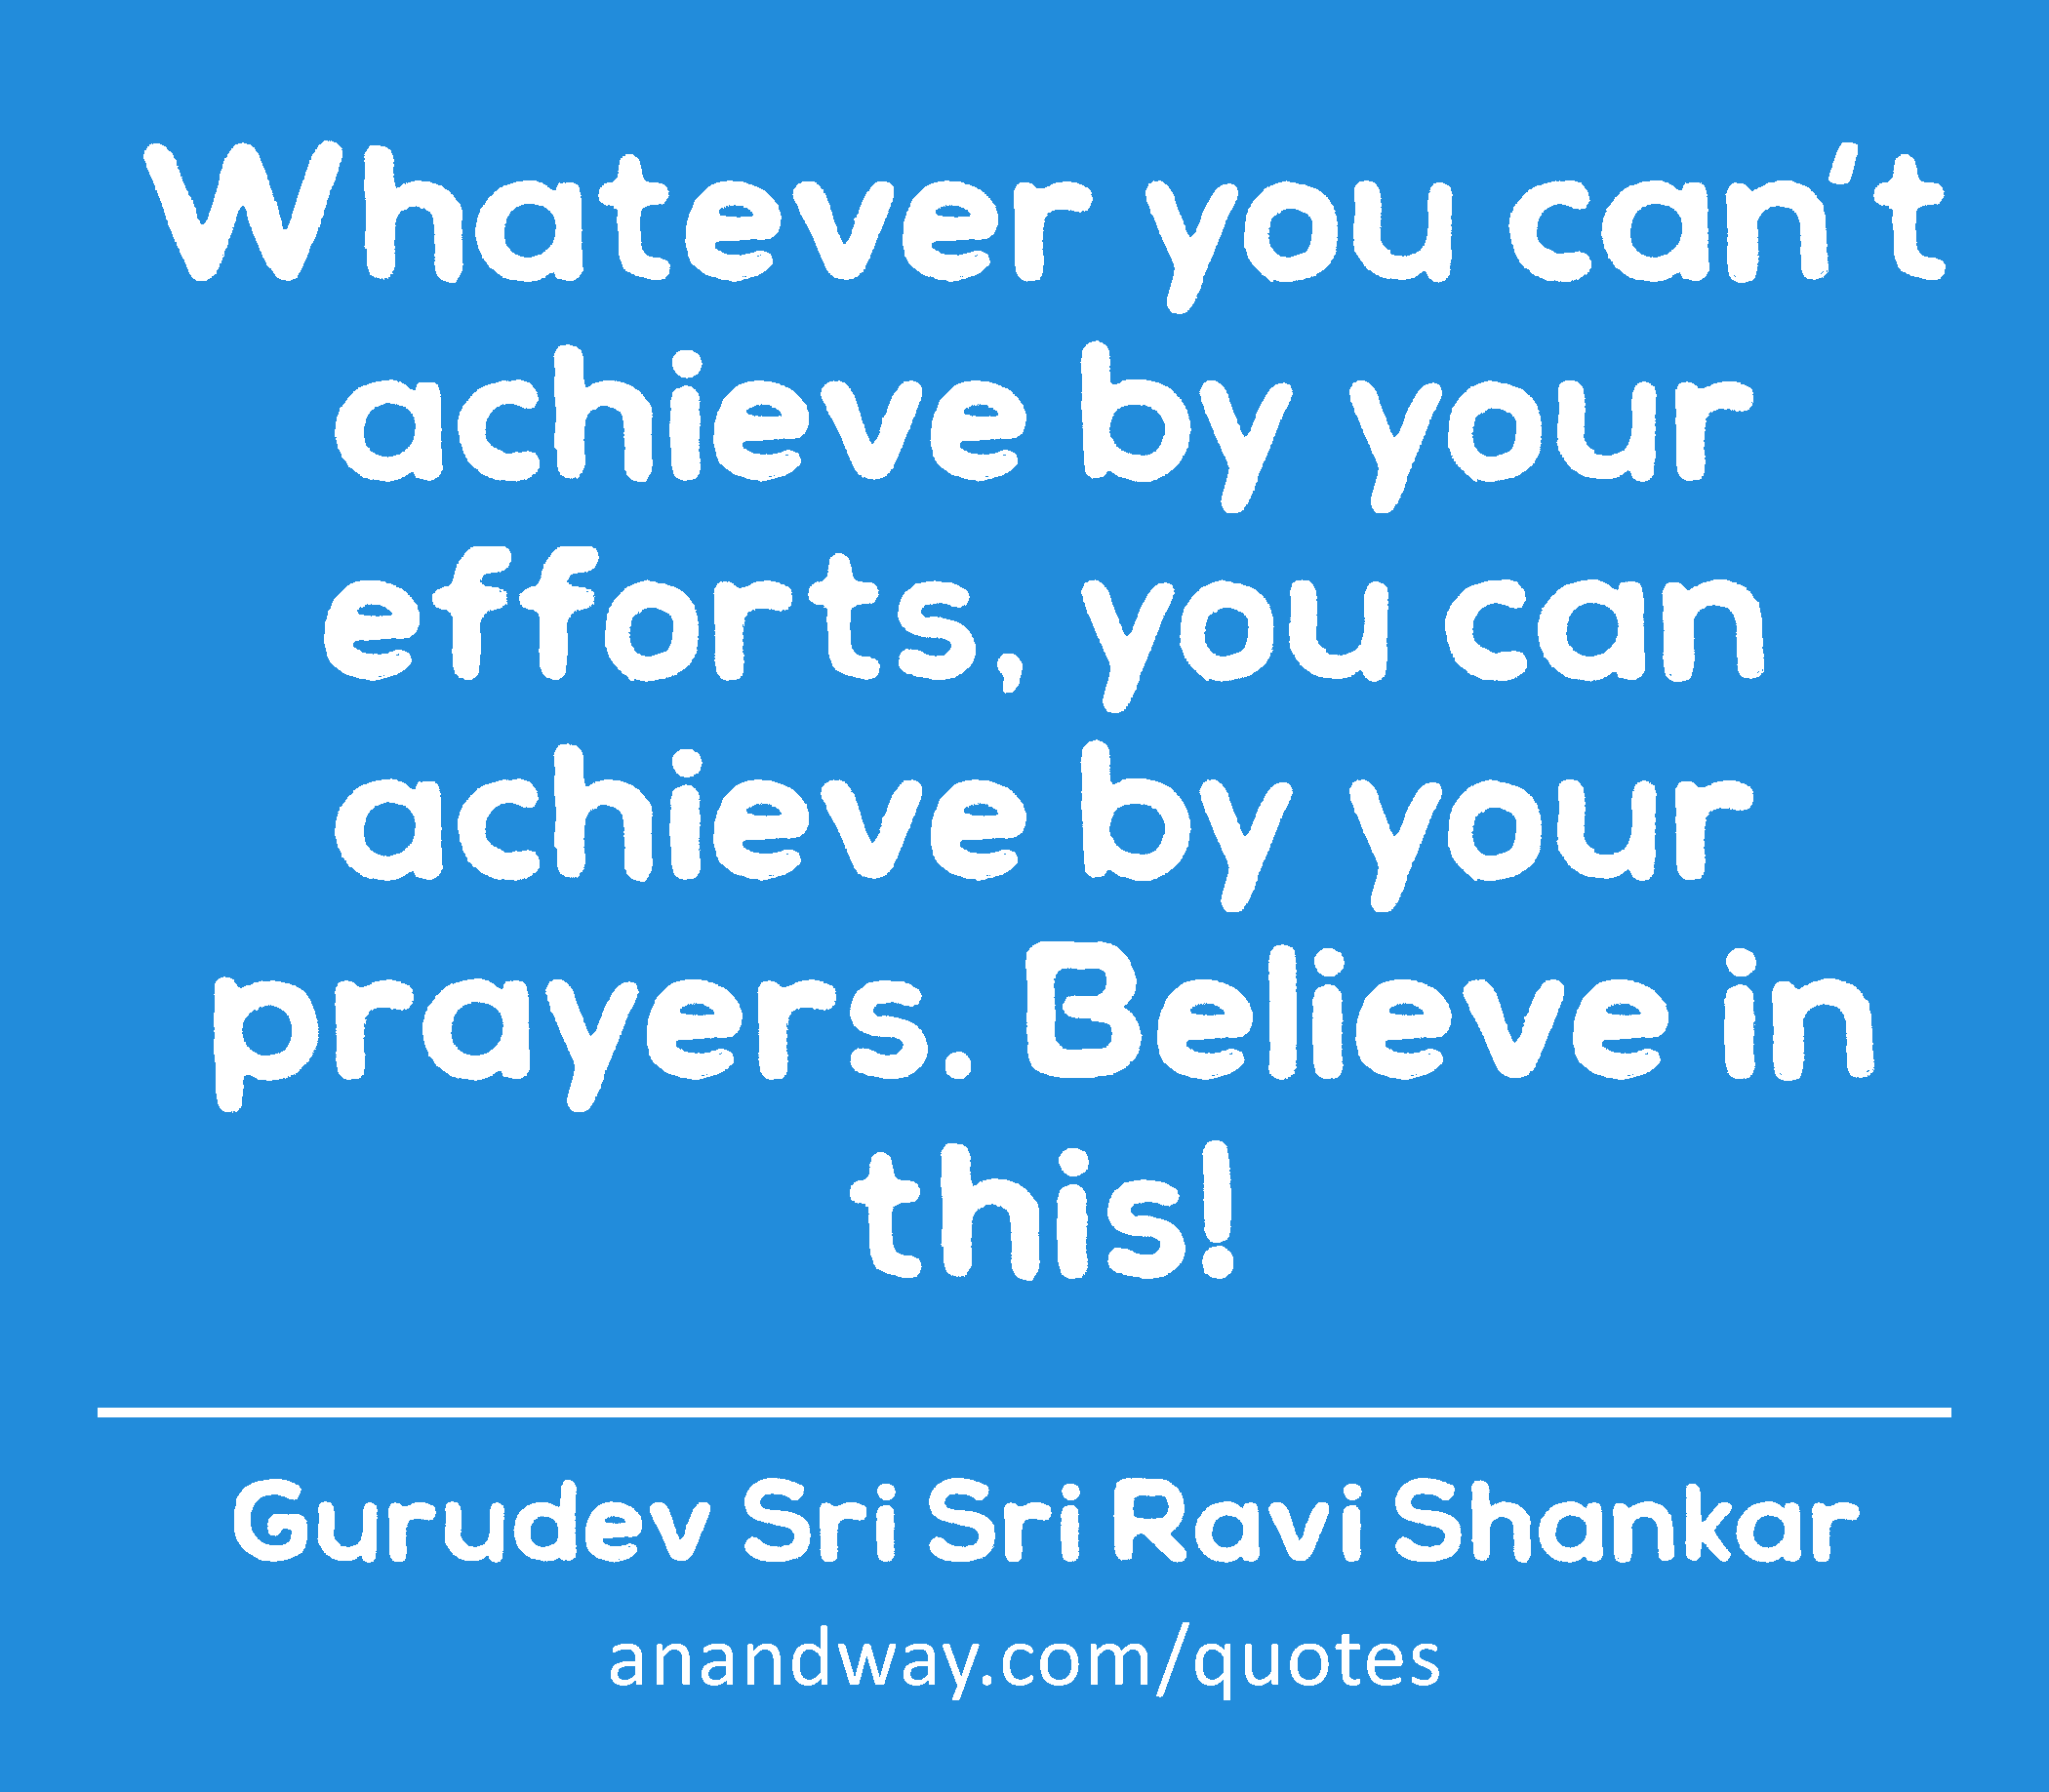 Whatever you can't achieve by your efforts, you can achieve by your prayers. Believe in this! 
 -Gurudev Sri Sri Ravi Shankar